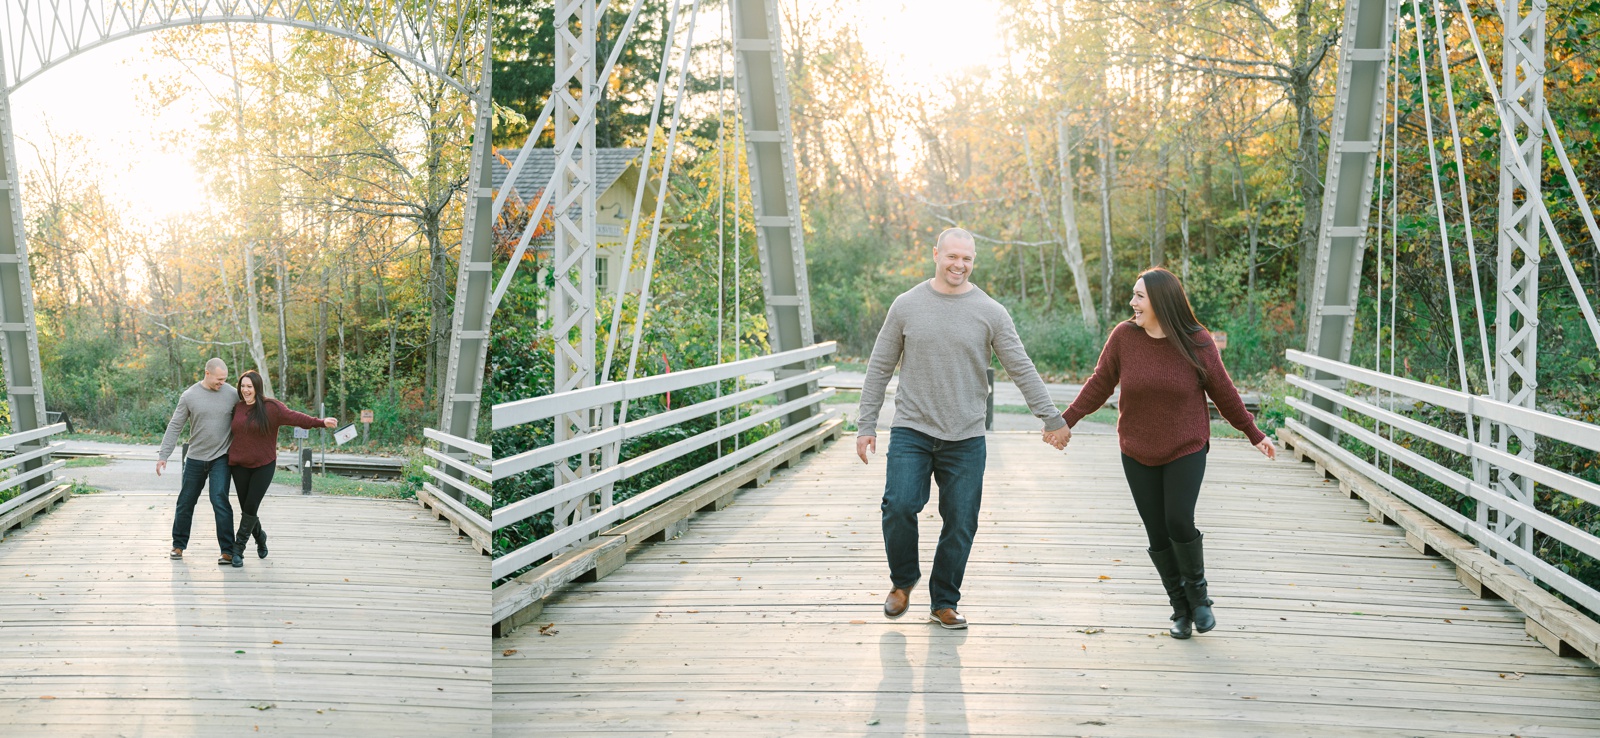 Fall Engagement Session at Station Road Bridge in Brecksville Ohio